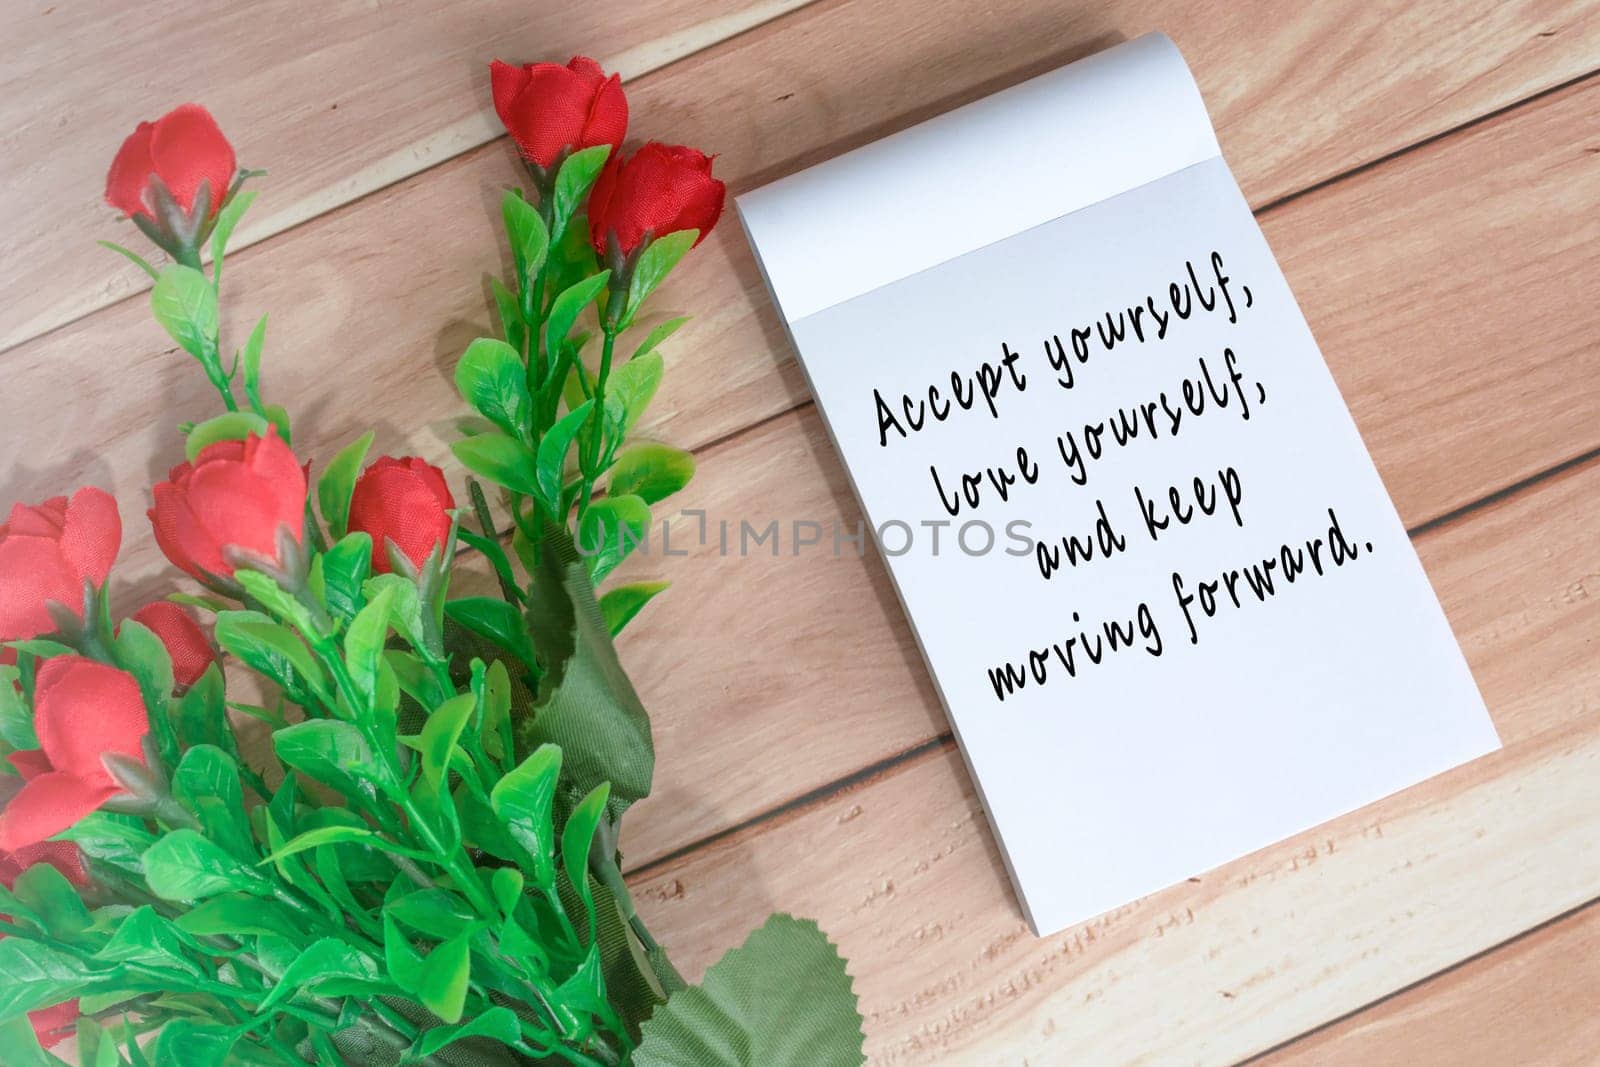 Motivational quote written on note book with artificial flowers on wooden desk - Accept yourself, love yourself and keep moving forward.